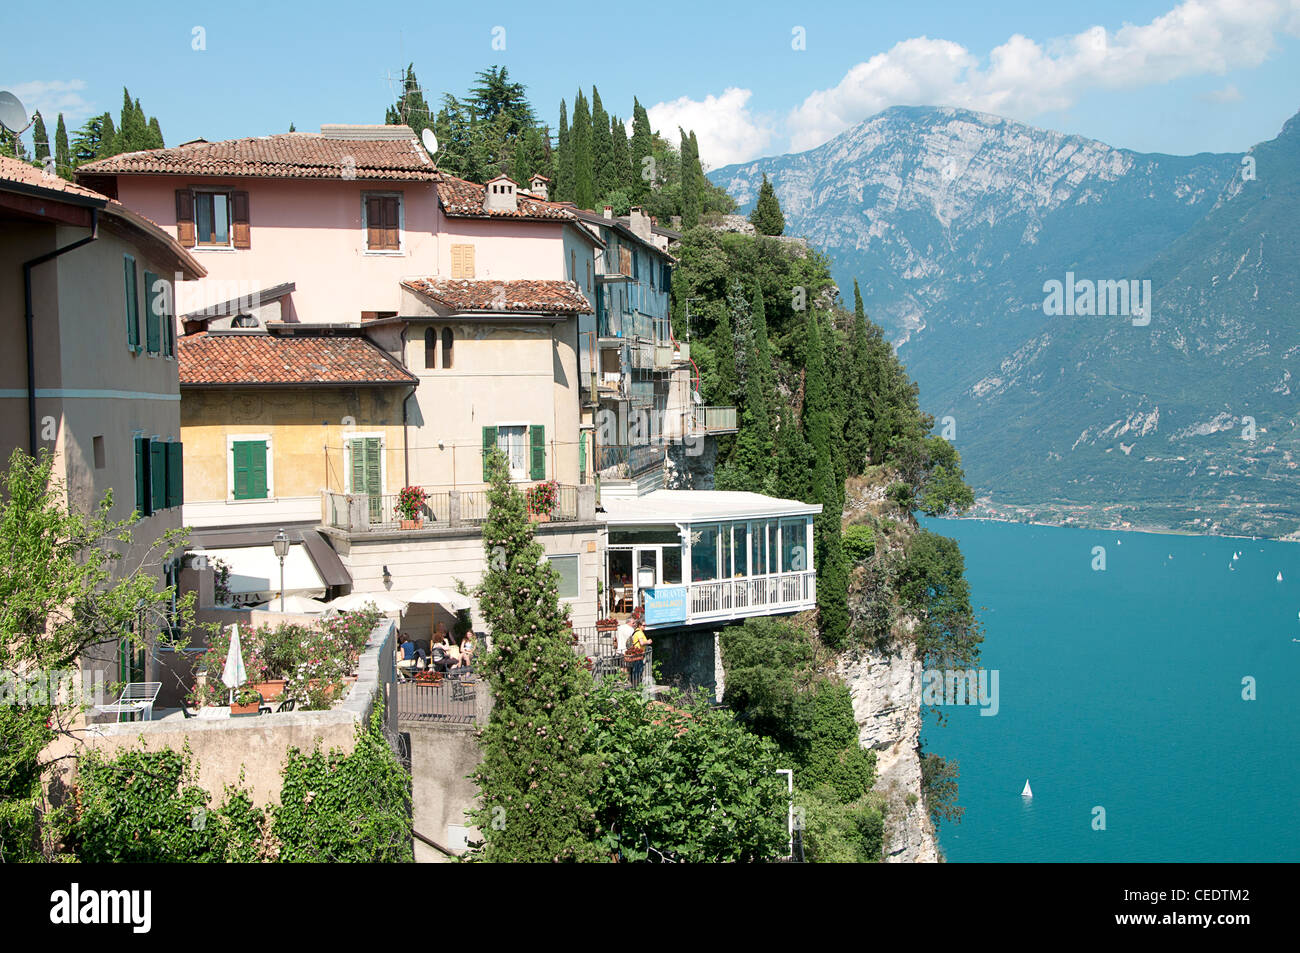 Italy, Lombardy, Lake Garda, Pieve di Tremosine, houses perched on cliffs overlooking lake Stock Photo